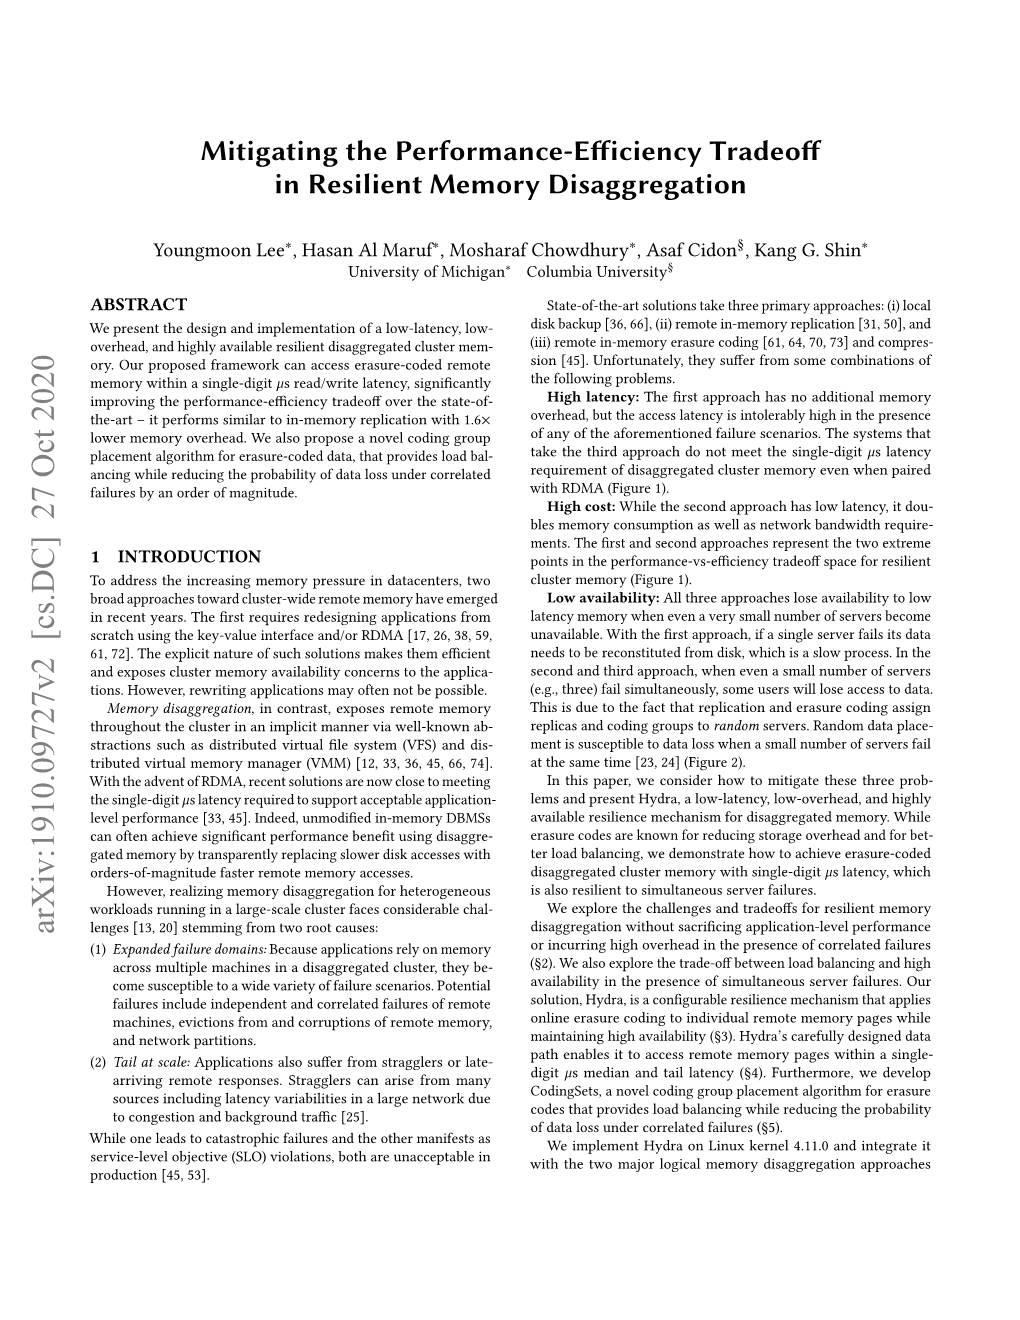 Mitigating the Performance-Efficiency Tradeoff in Resilient Memory Disaggregation